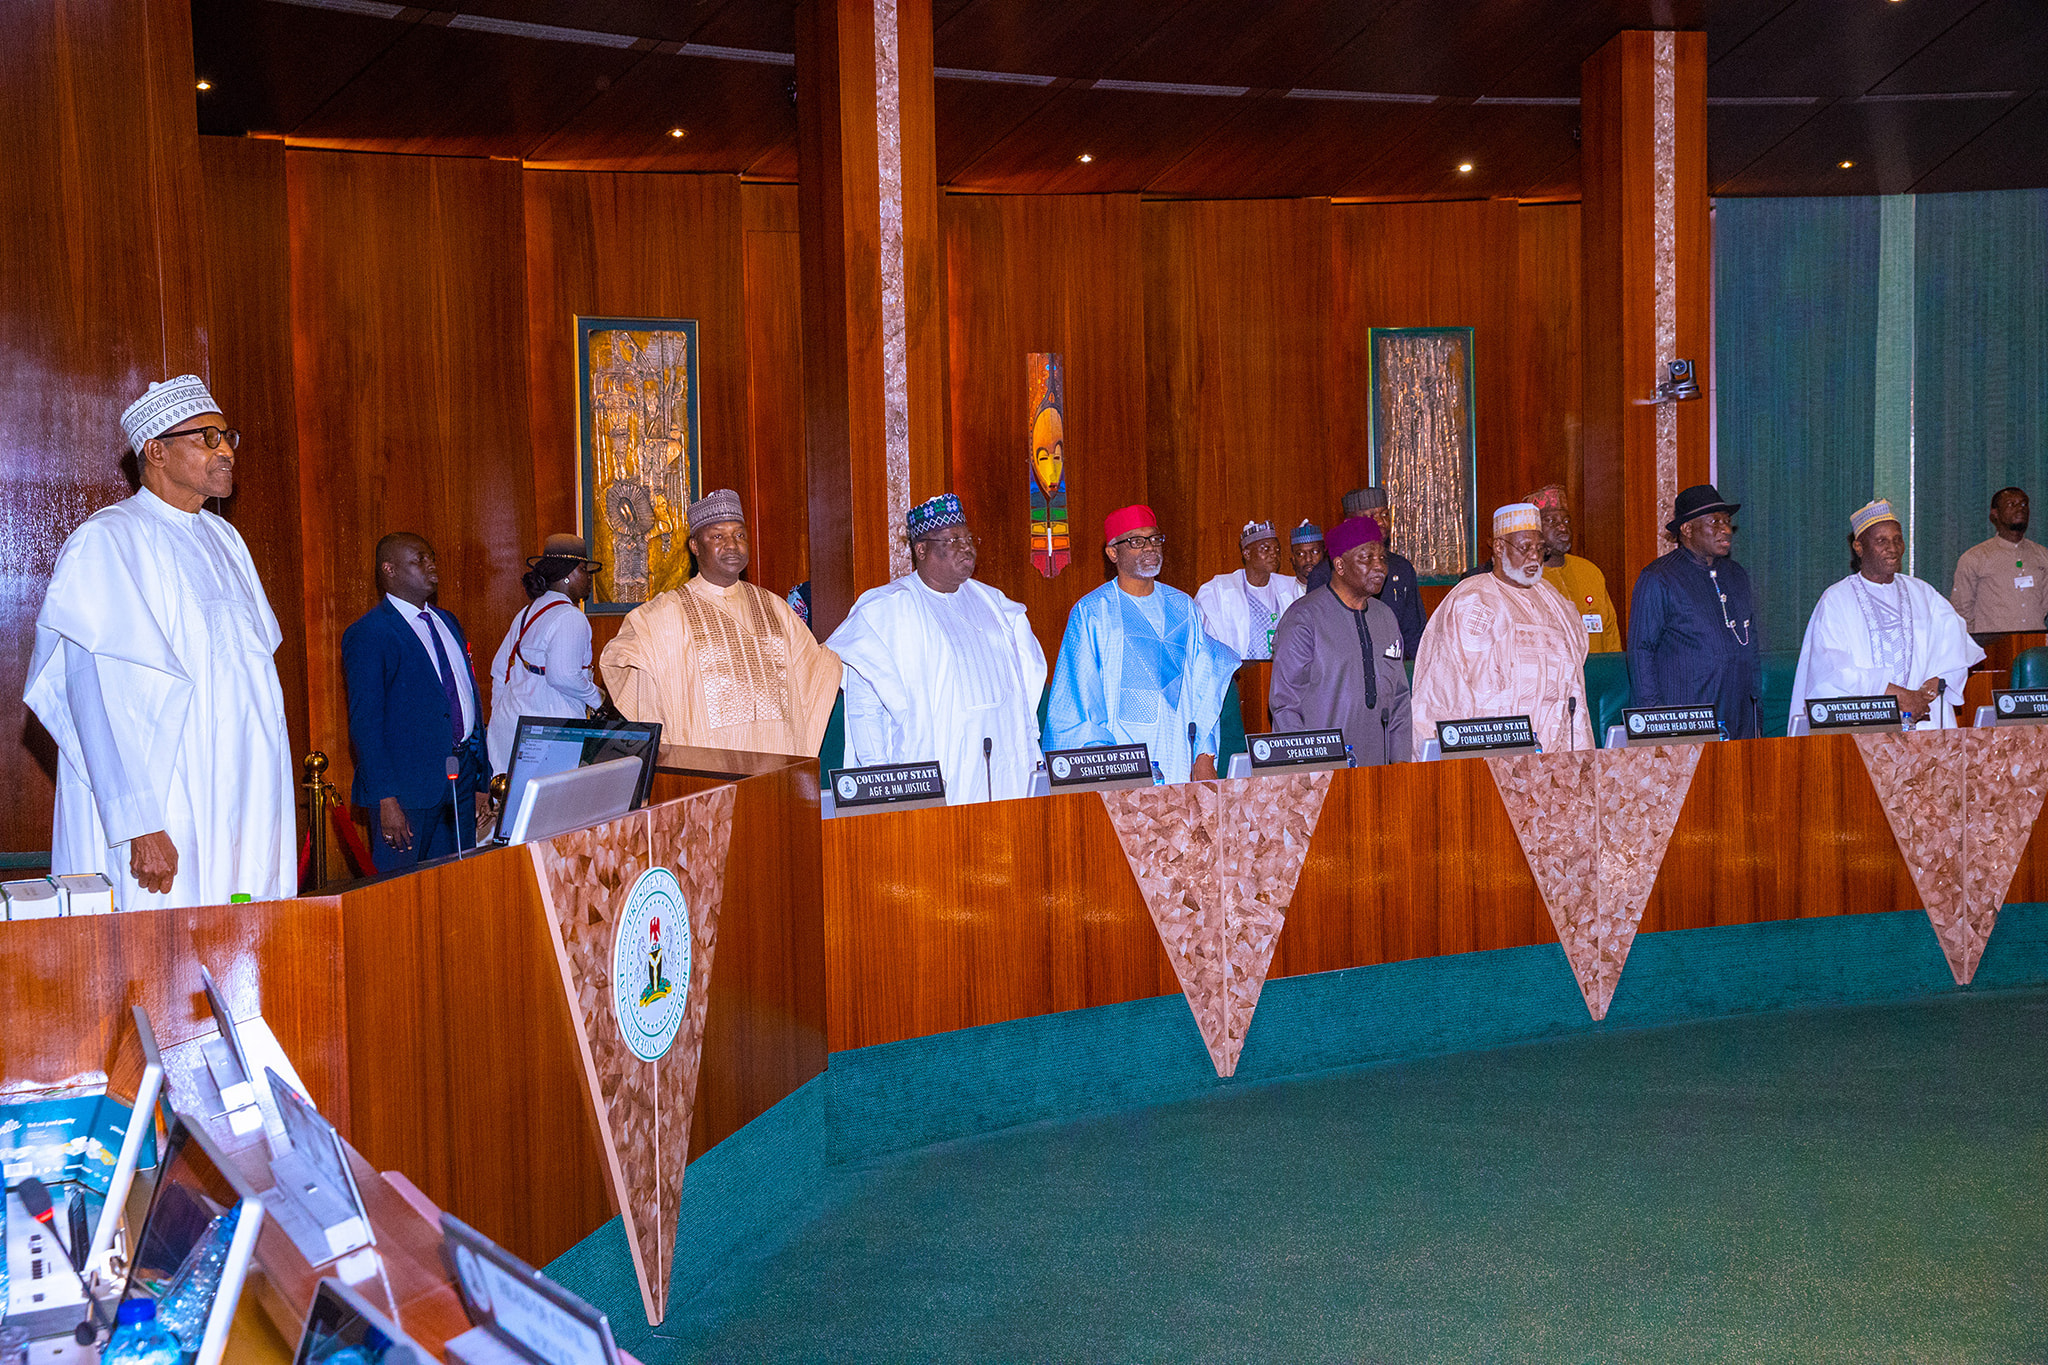 Print more new notes or recirculate old notes – Council of State tells CBN